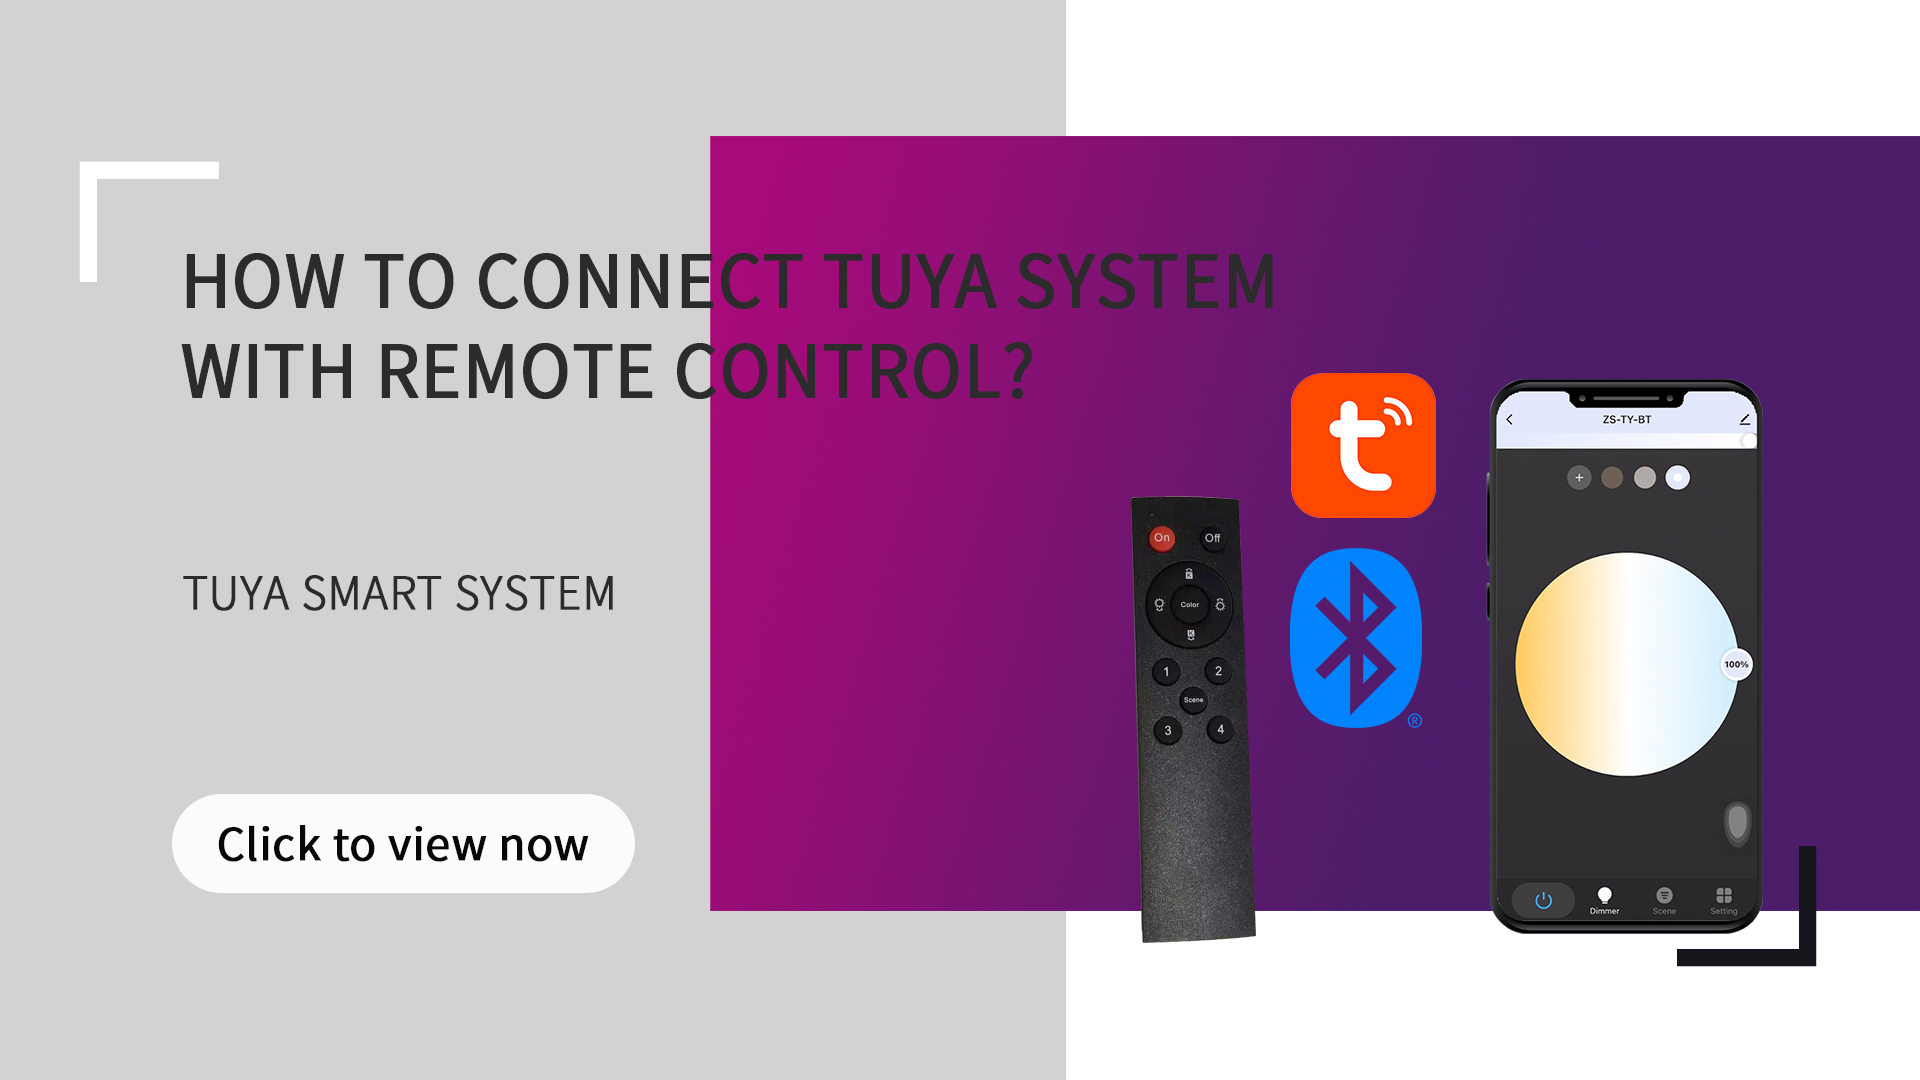 How to connect tuya system with remote control?